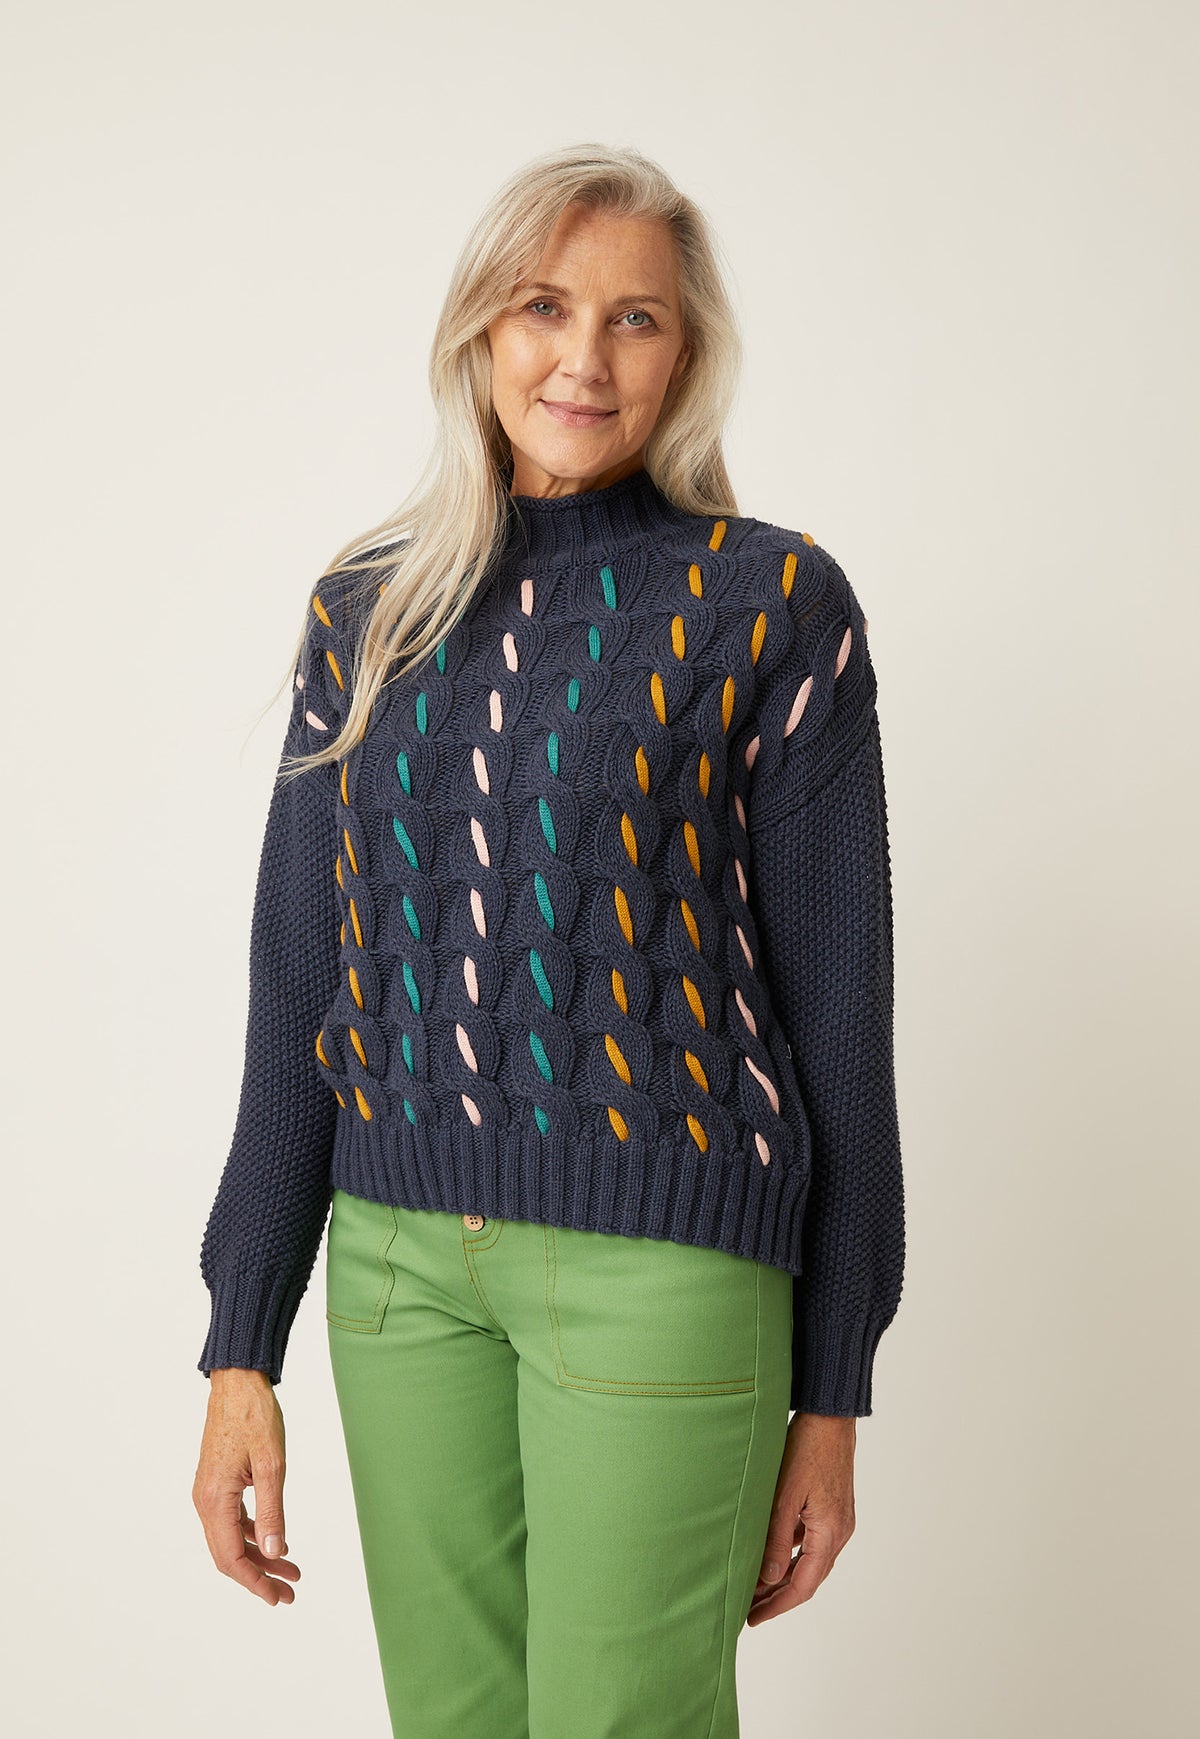 Evie Cable Knit - Navy Marle